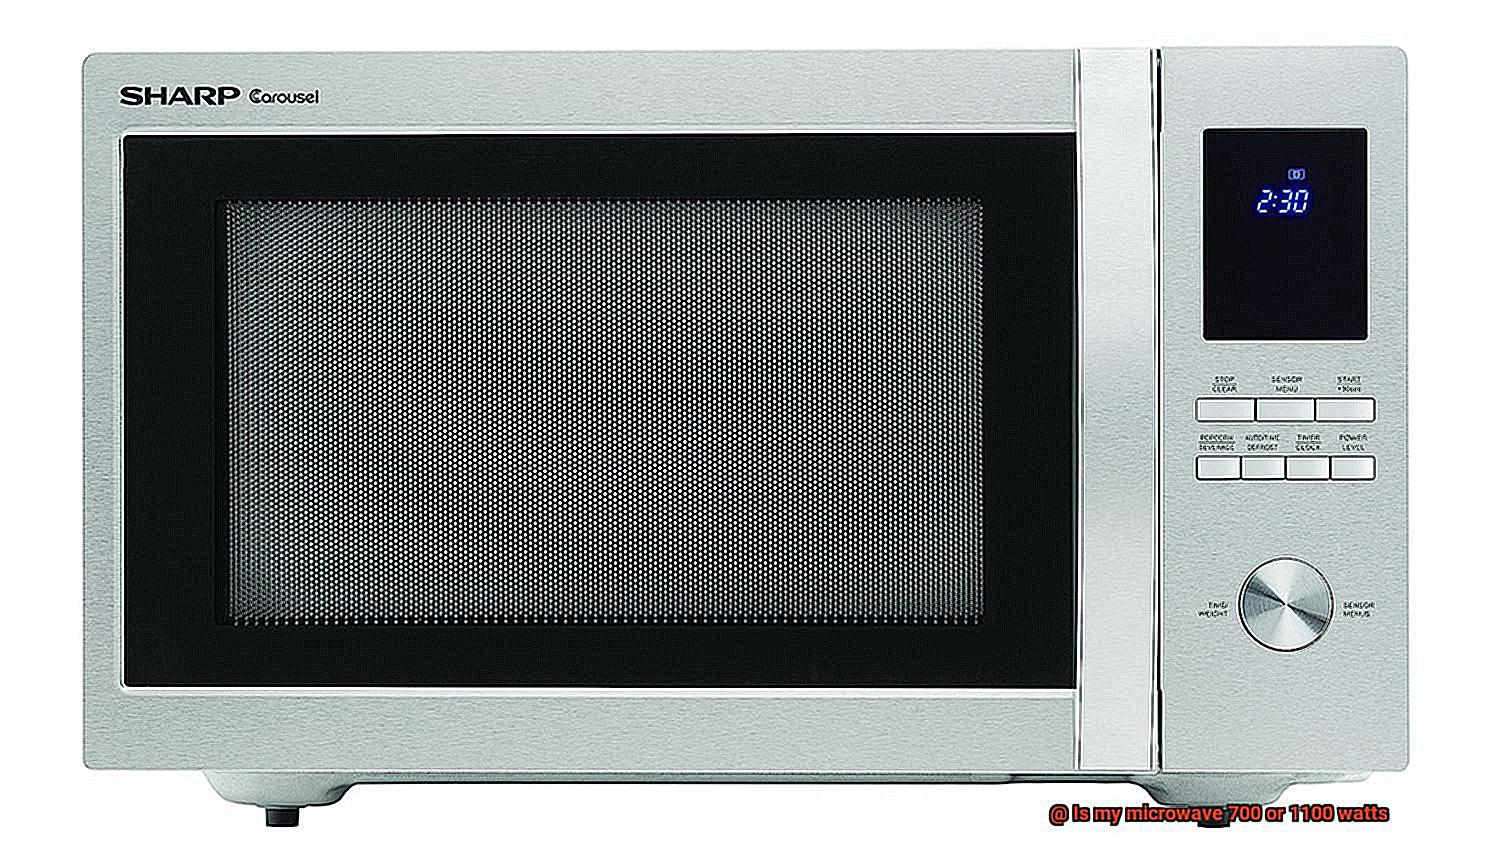 Is my microwave 700 or 1100 watts-3